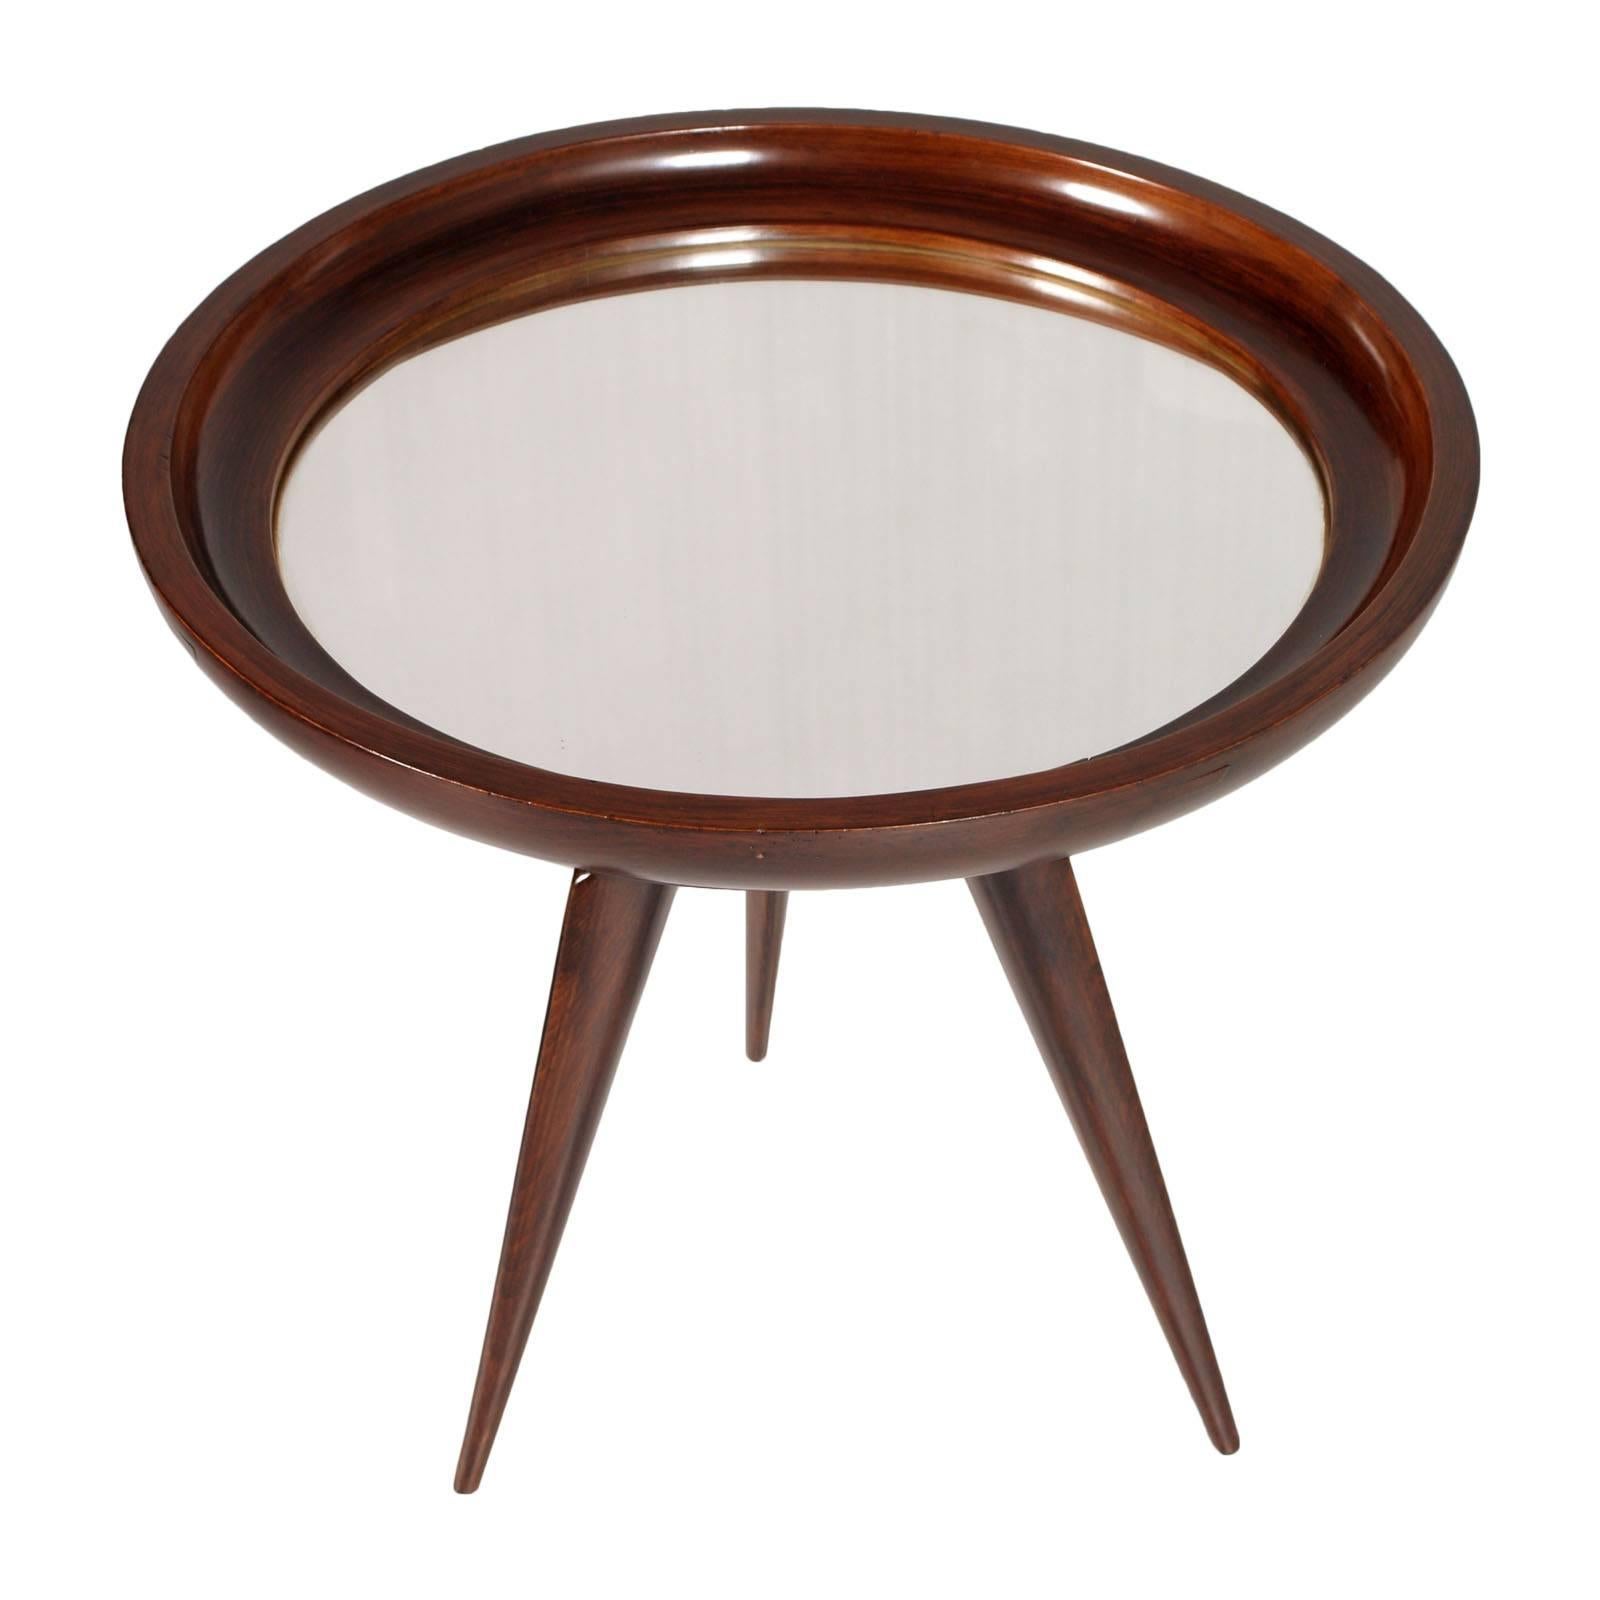 Rare awesome center coffee cocktail table in mahogany, Cesare Lacca attributed, with top mirror and gilt brass connections.
The style is reminiscent of the architect Oscar Niemeyer

Measures cm: Height 53 diameter 62.